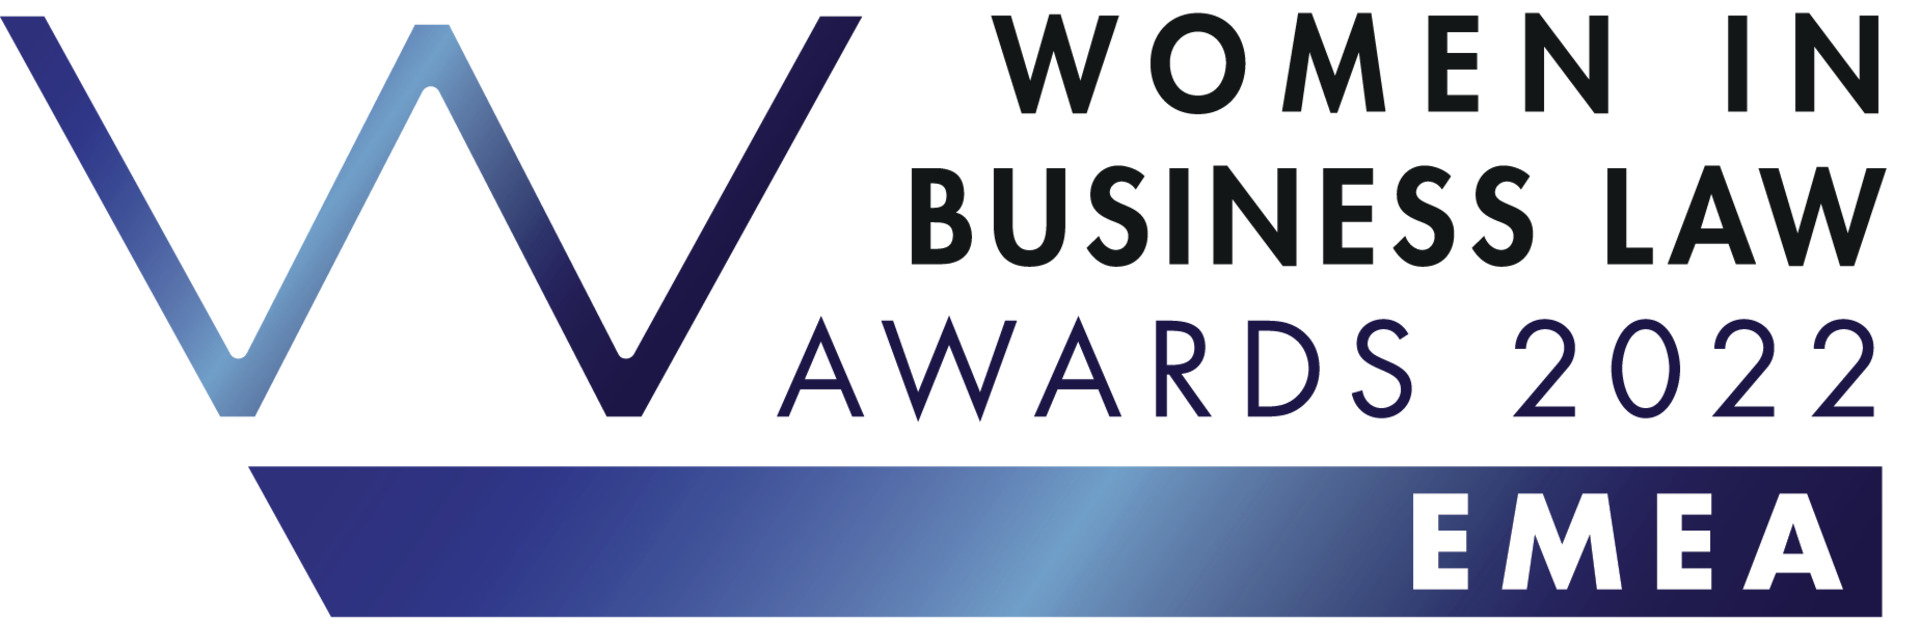 GOLAW Has Been Named the Only Ukrainian Law Firm Recognized by “Women in Business Law 2022”